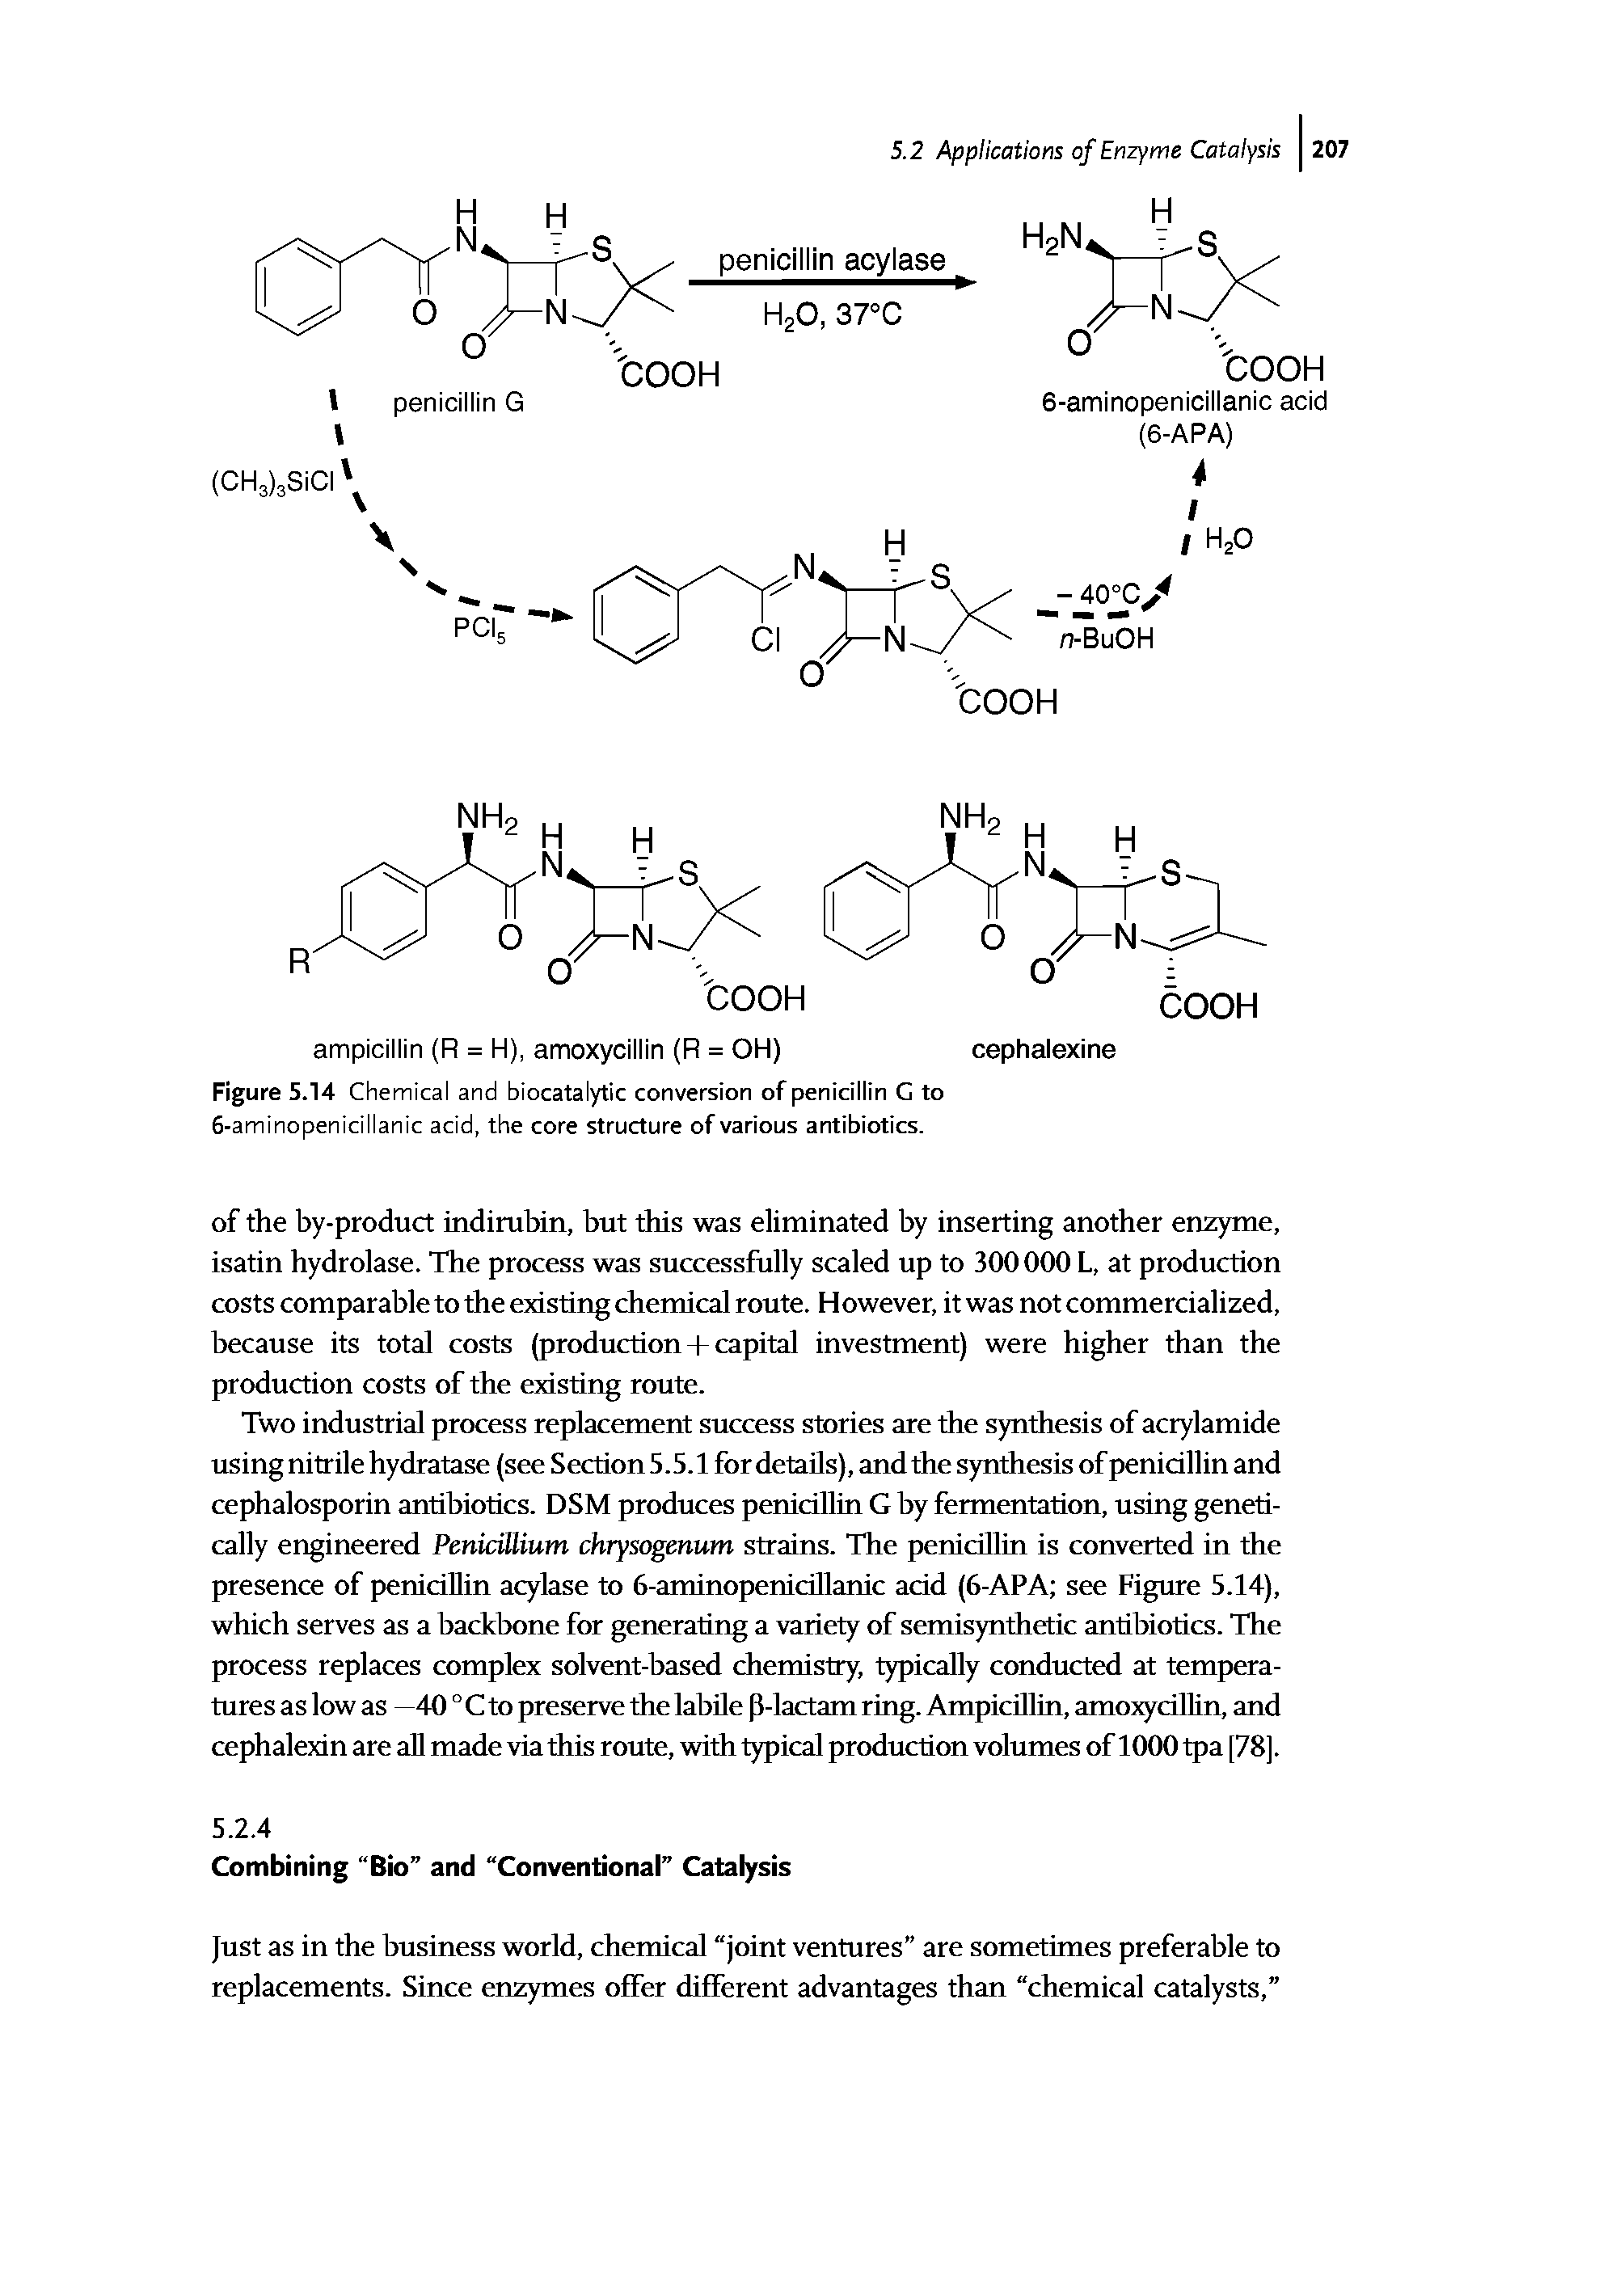 Figure 5.14 Chemical and biocatalytic conversion of penicillin G to 6-aminopenicillanic acid, the core structure of various antibiotics.